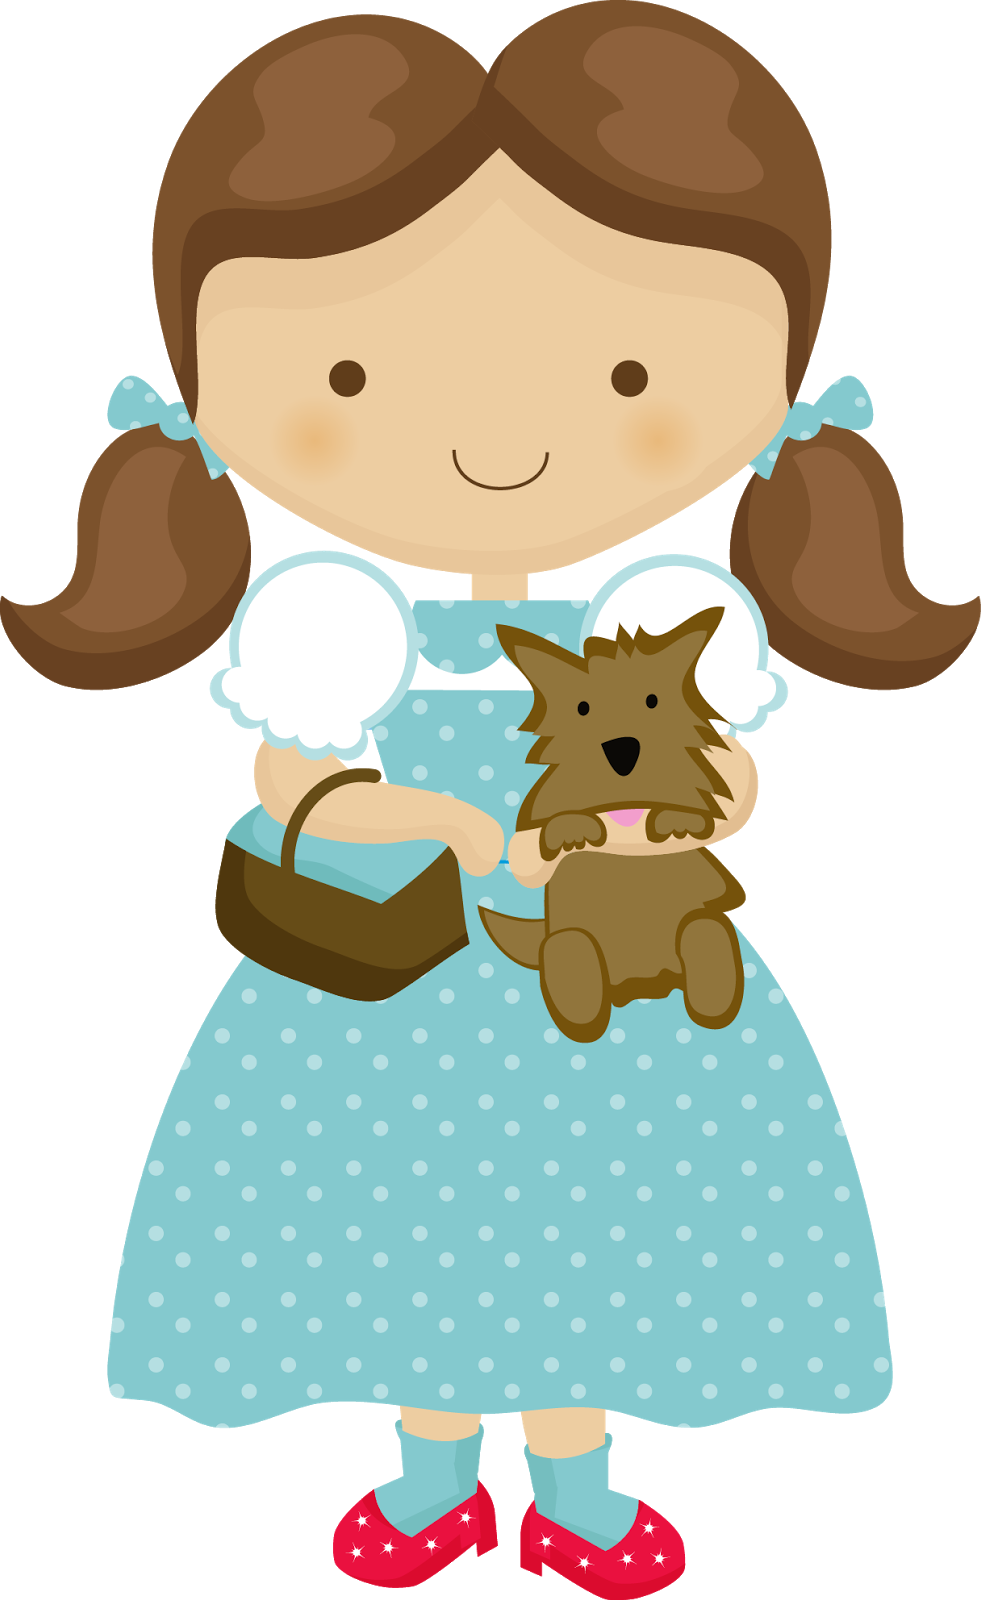 Dorothy In Oz Clip Art - Wizard Of Oz Images, Transparent background PNG HD thumbnail